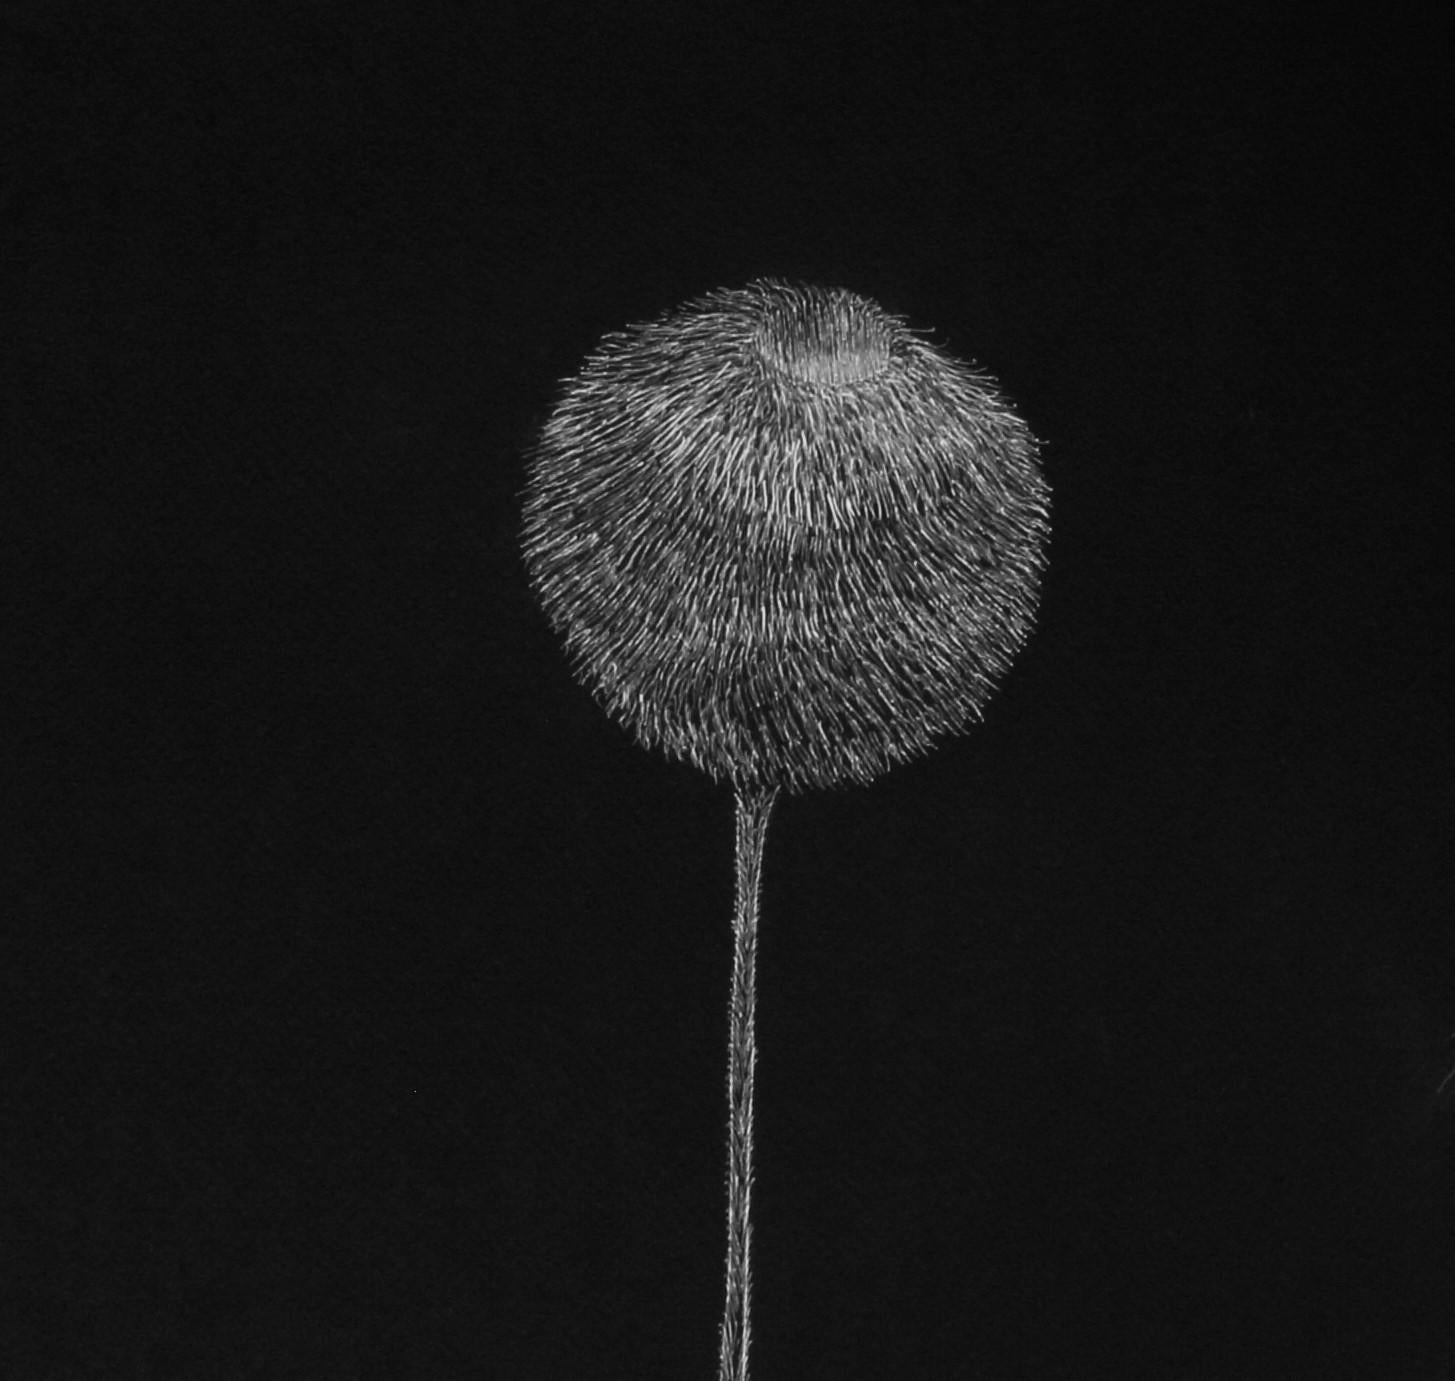 Secret Garden 12, 2020
white ink on black cardboard
27 9/16 H x 39 3/8 W in.
70 H x 100 W cm

The drawings signed by Alina Aldea show the meticulousness and perfection of microscopic observation. Alina Aldea's creation is driven by the idea of